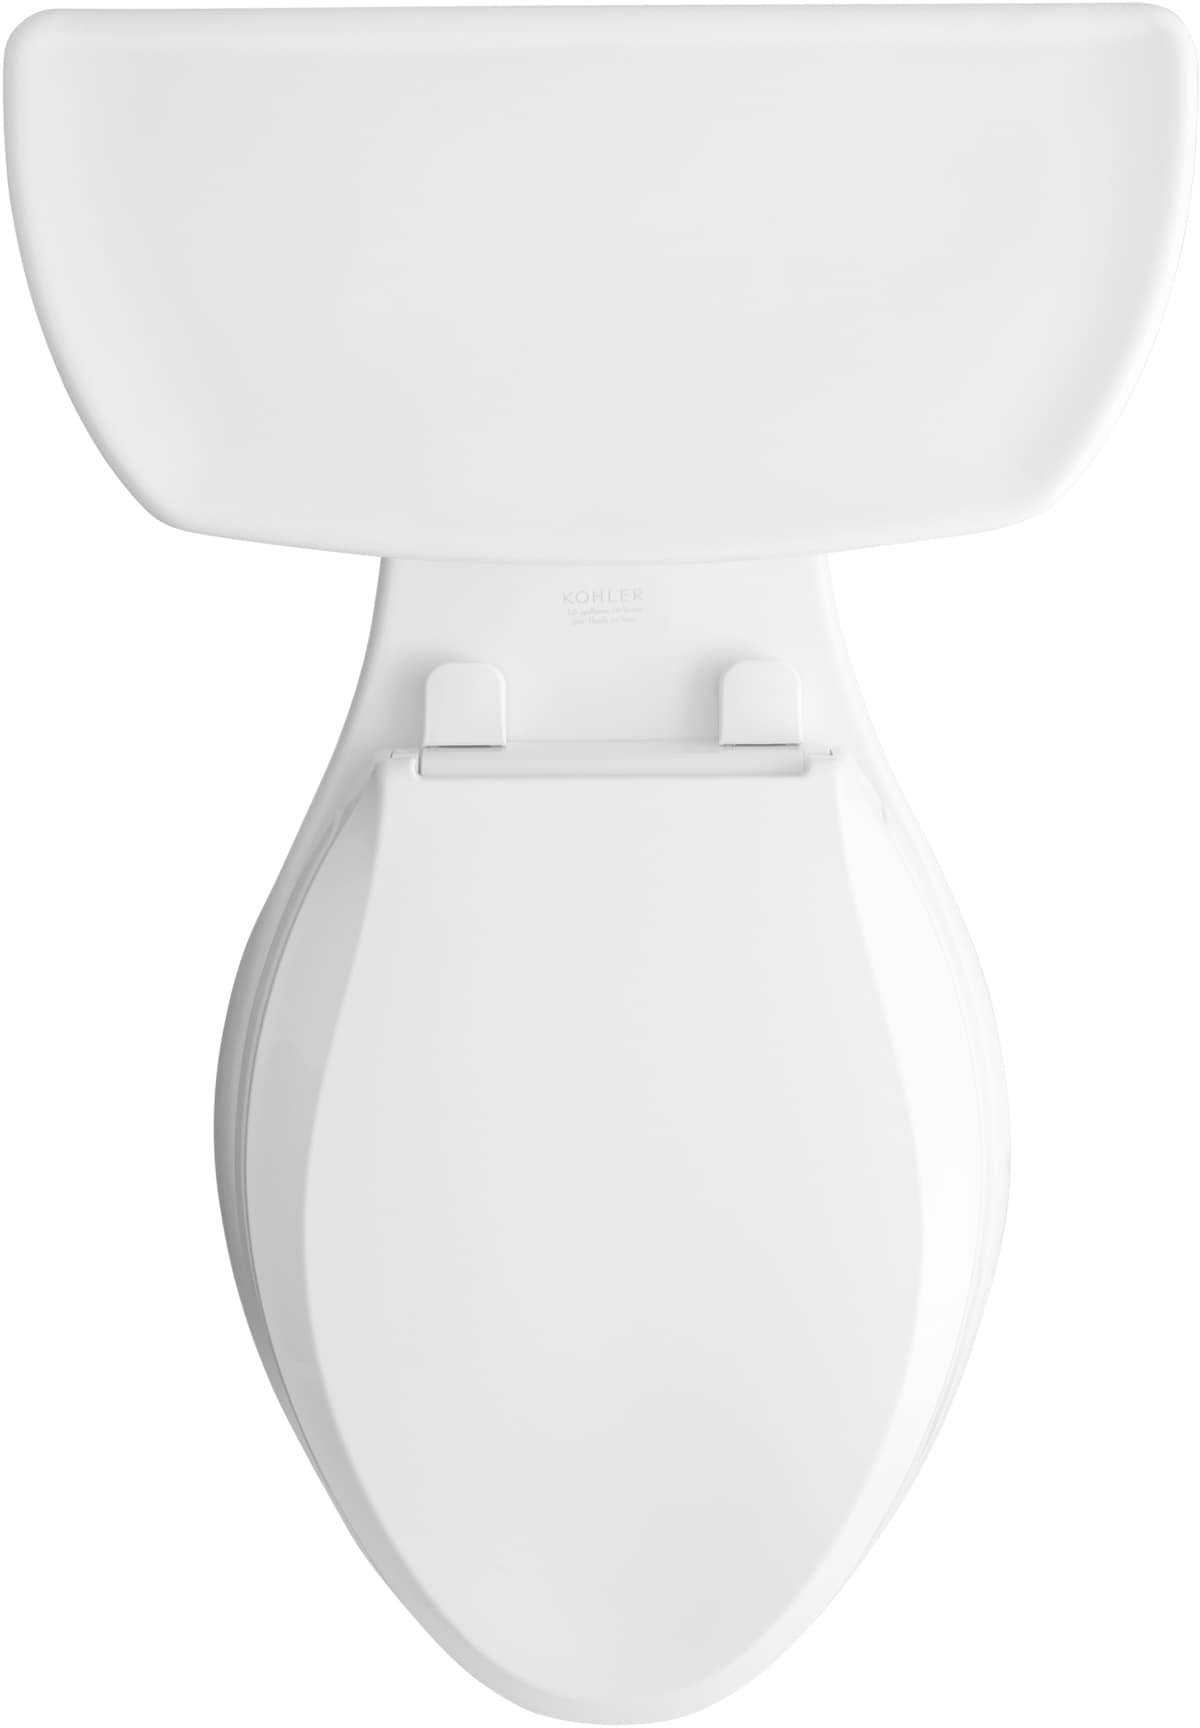 17.1” High Toilets Elongated Tall Toilet with S-trap, 12” Rough in